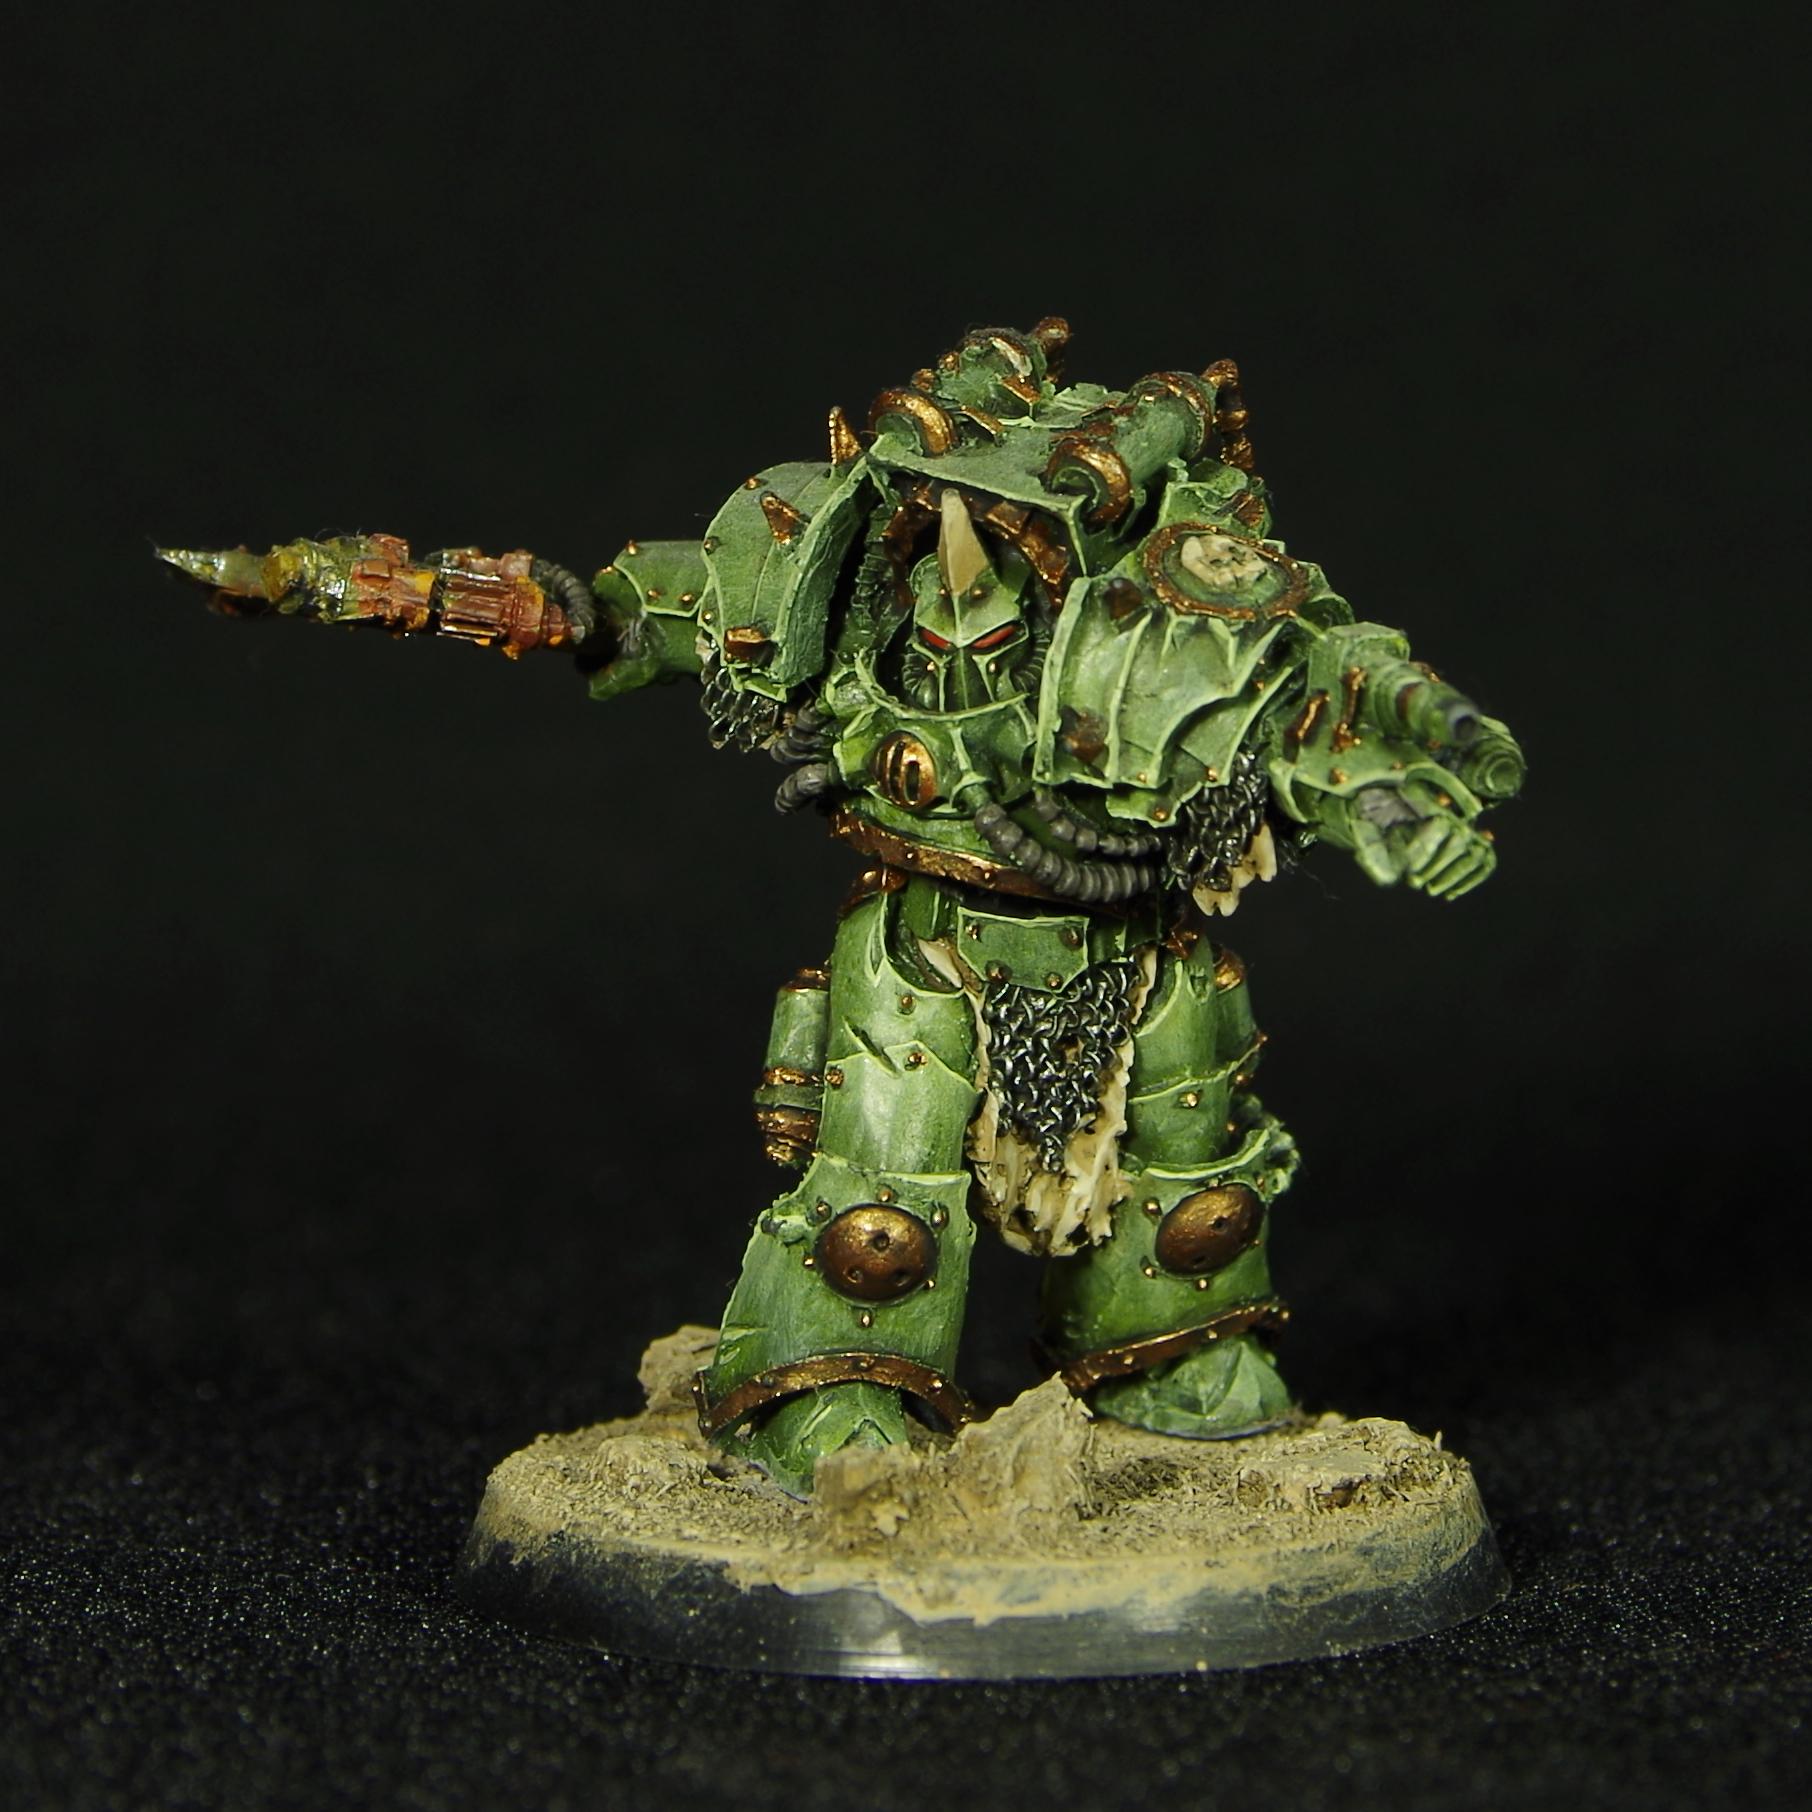 Champion, Chaos, Chaos Space Marines, Daemons, Forge World, Nurgle, Plague, Prince, Space, Space Marines, Terminator Armor, Typhon, Typhus, Warhammer 40,000, Warhammer Fantasy, Wh40